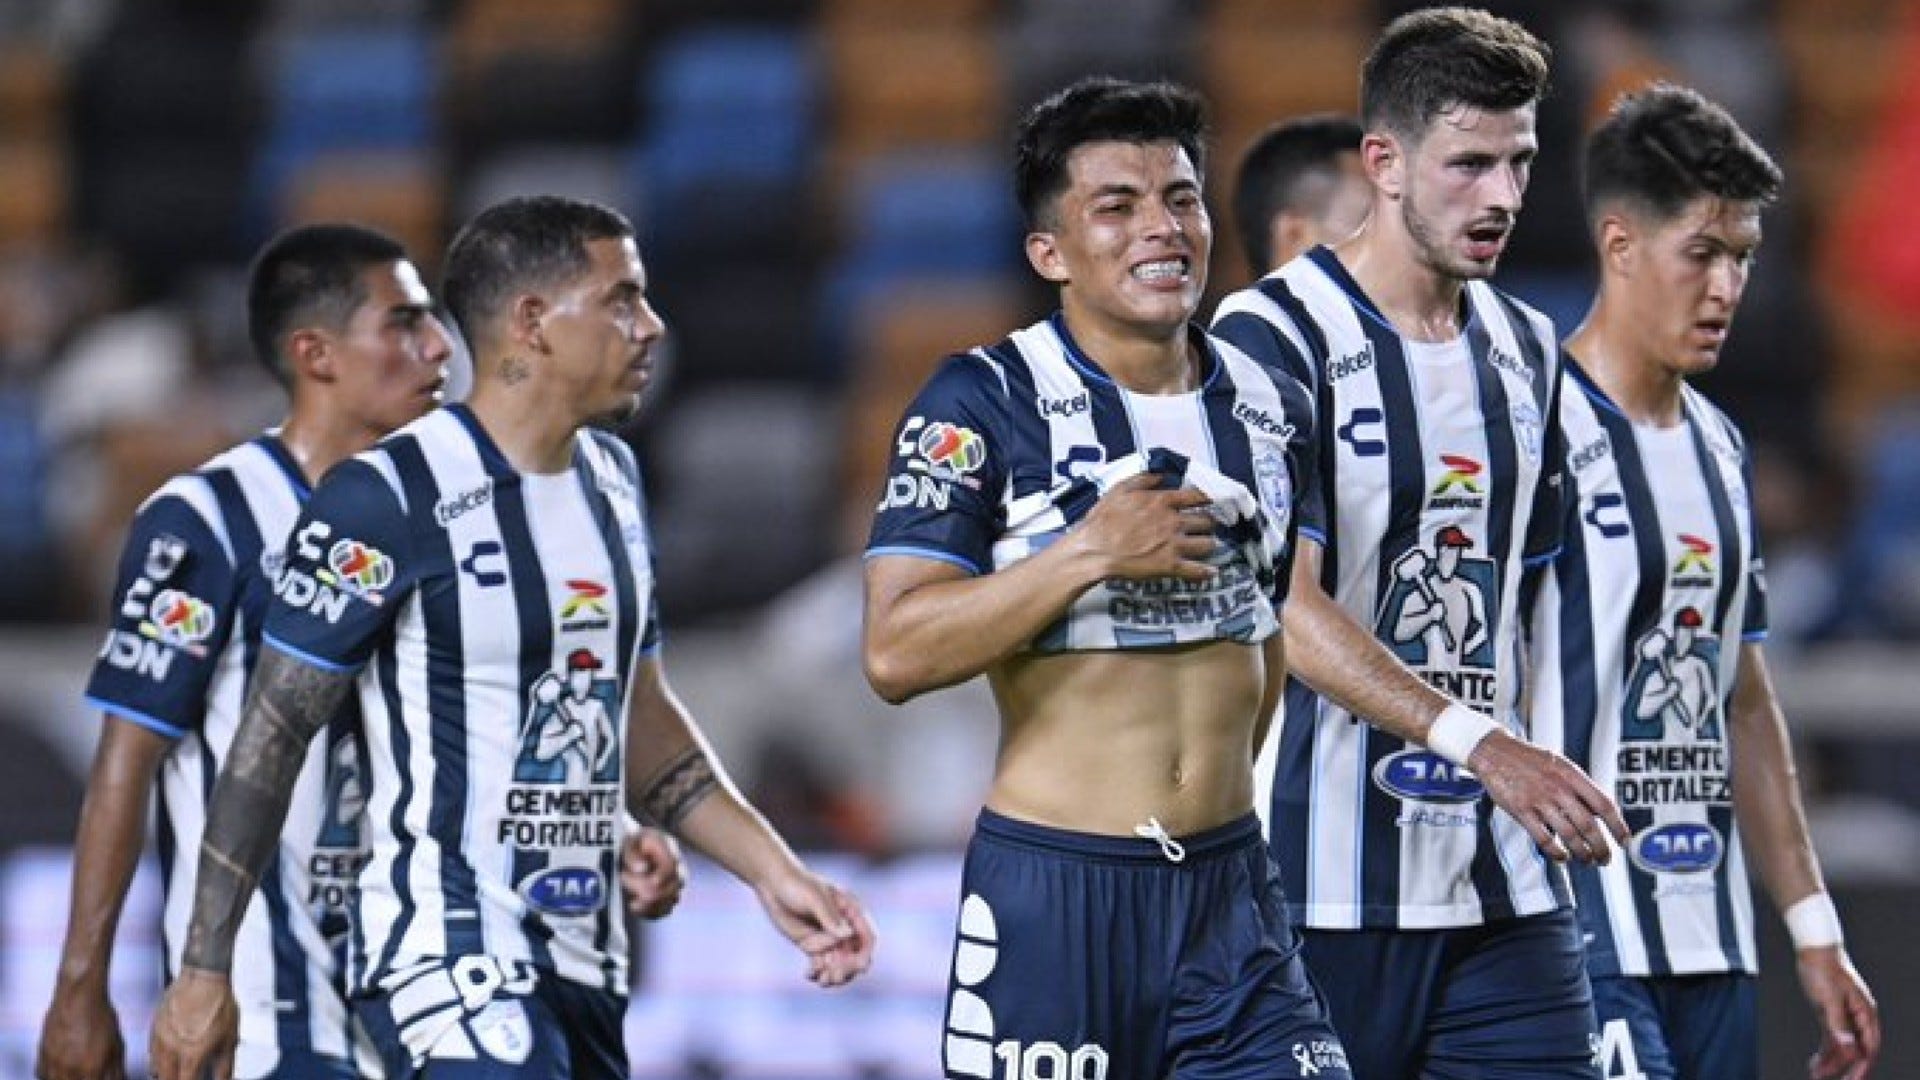 Pachuca vs Cruz Azul Where to watch the match online, live stream, TV channels, and kick-off time Goal US